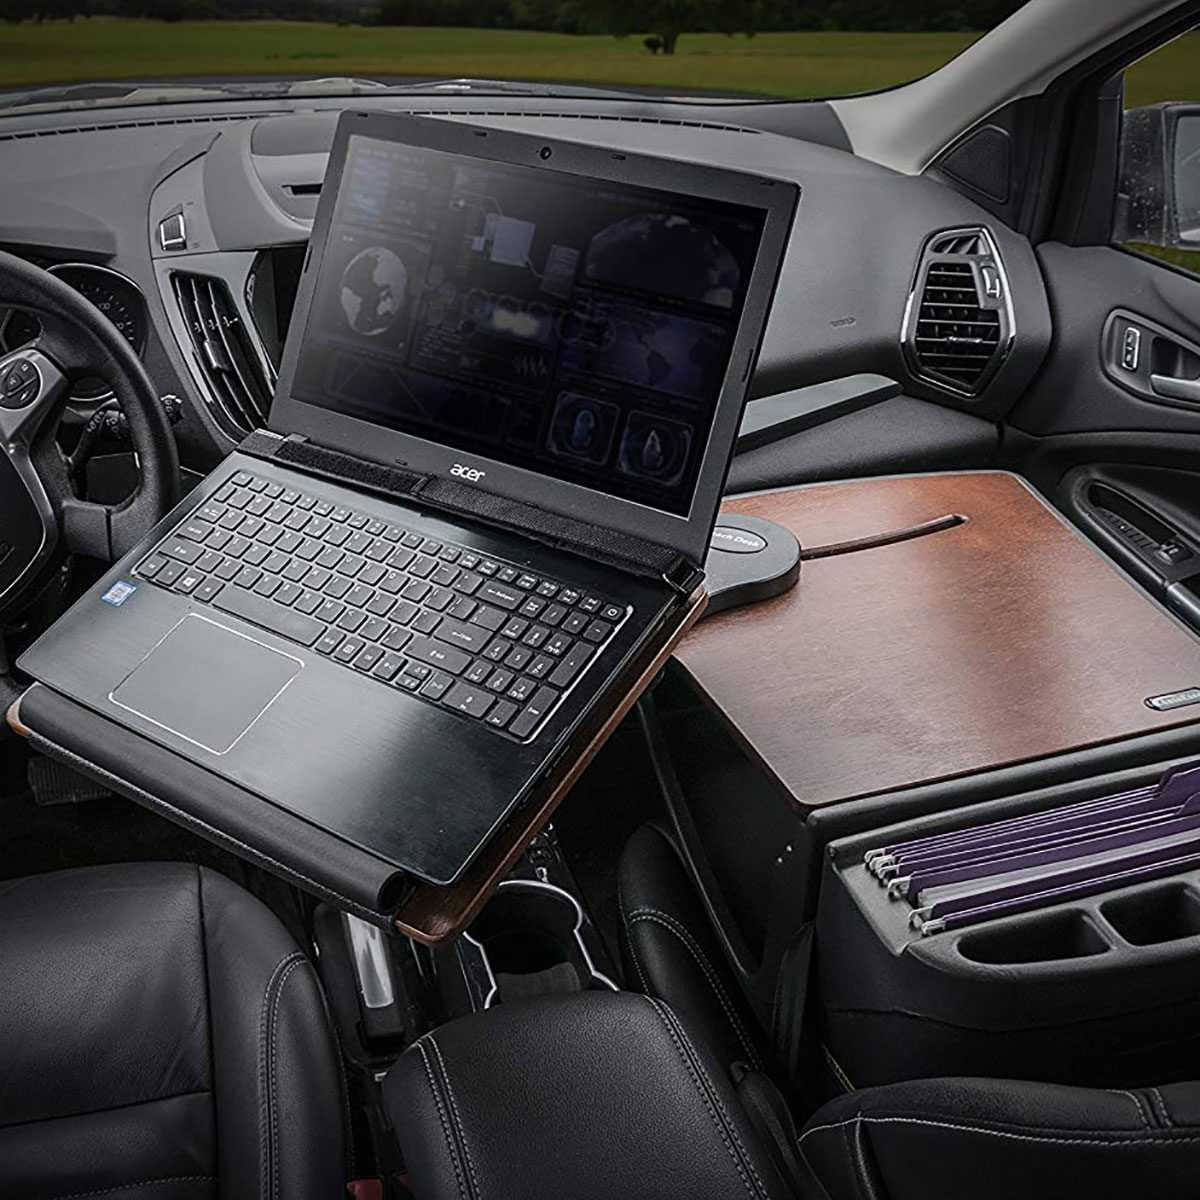 This Pickup Truck Gear Creates a Truly Mobile Office